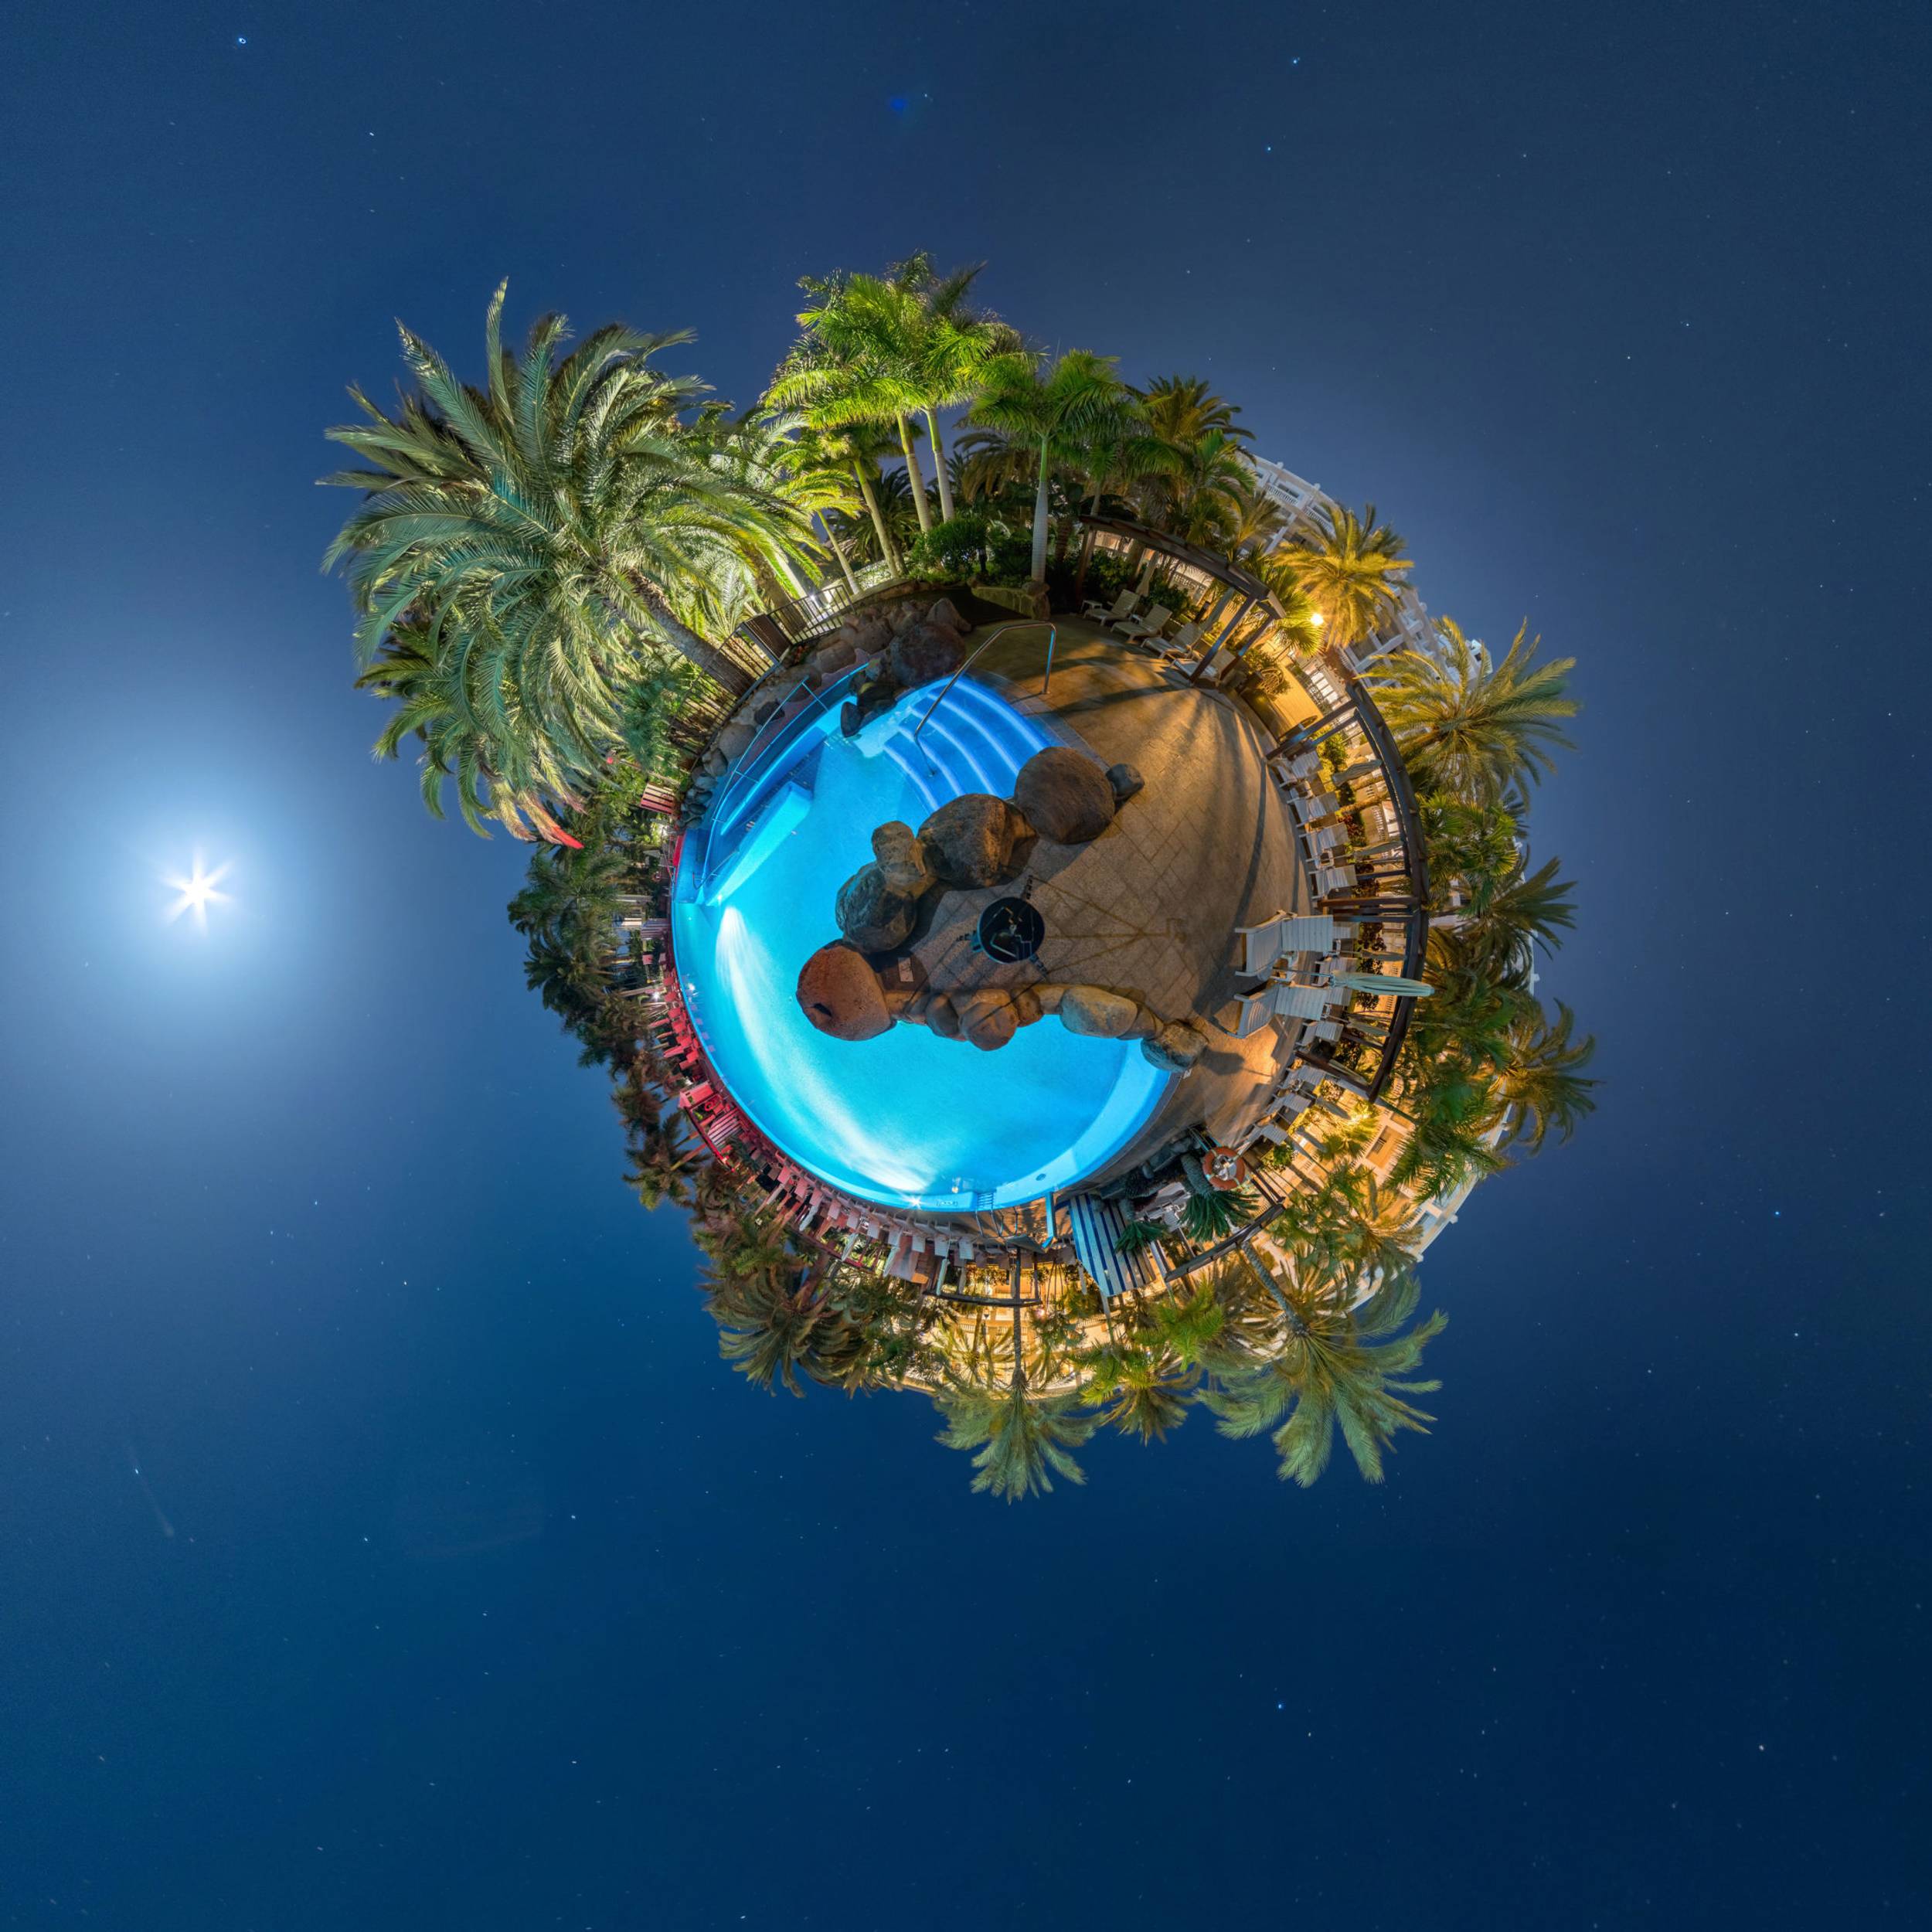 VR_IMGP0634-HDR_IMGP0663-HDR-30_images_Little_Planet_8AZZAYwf0.jpg